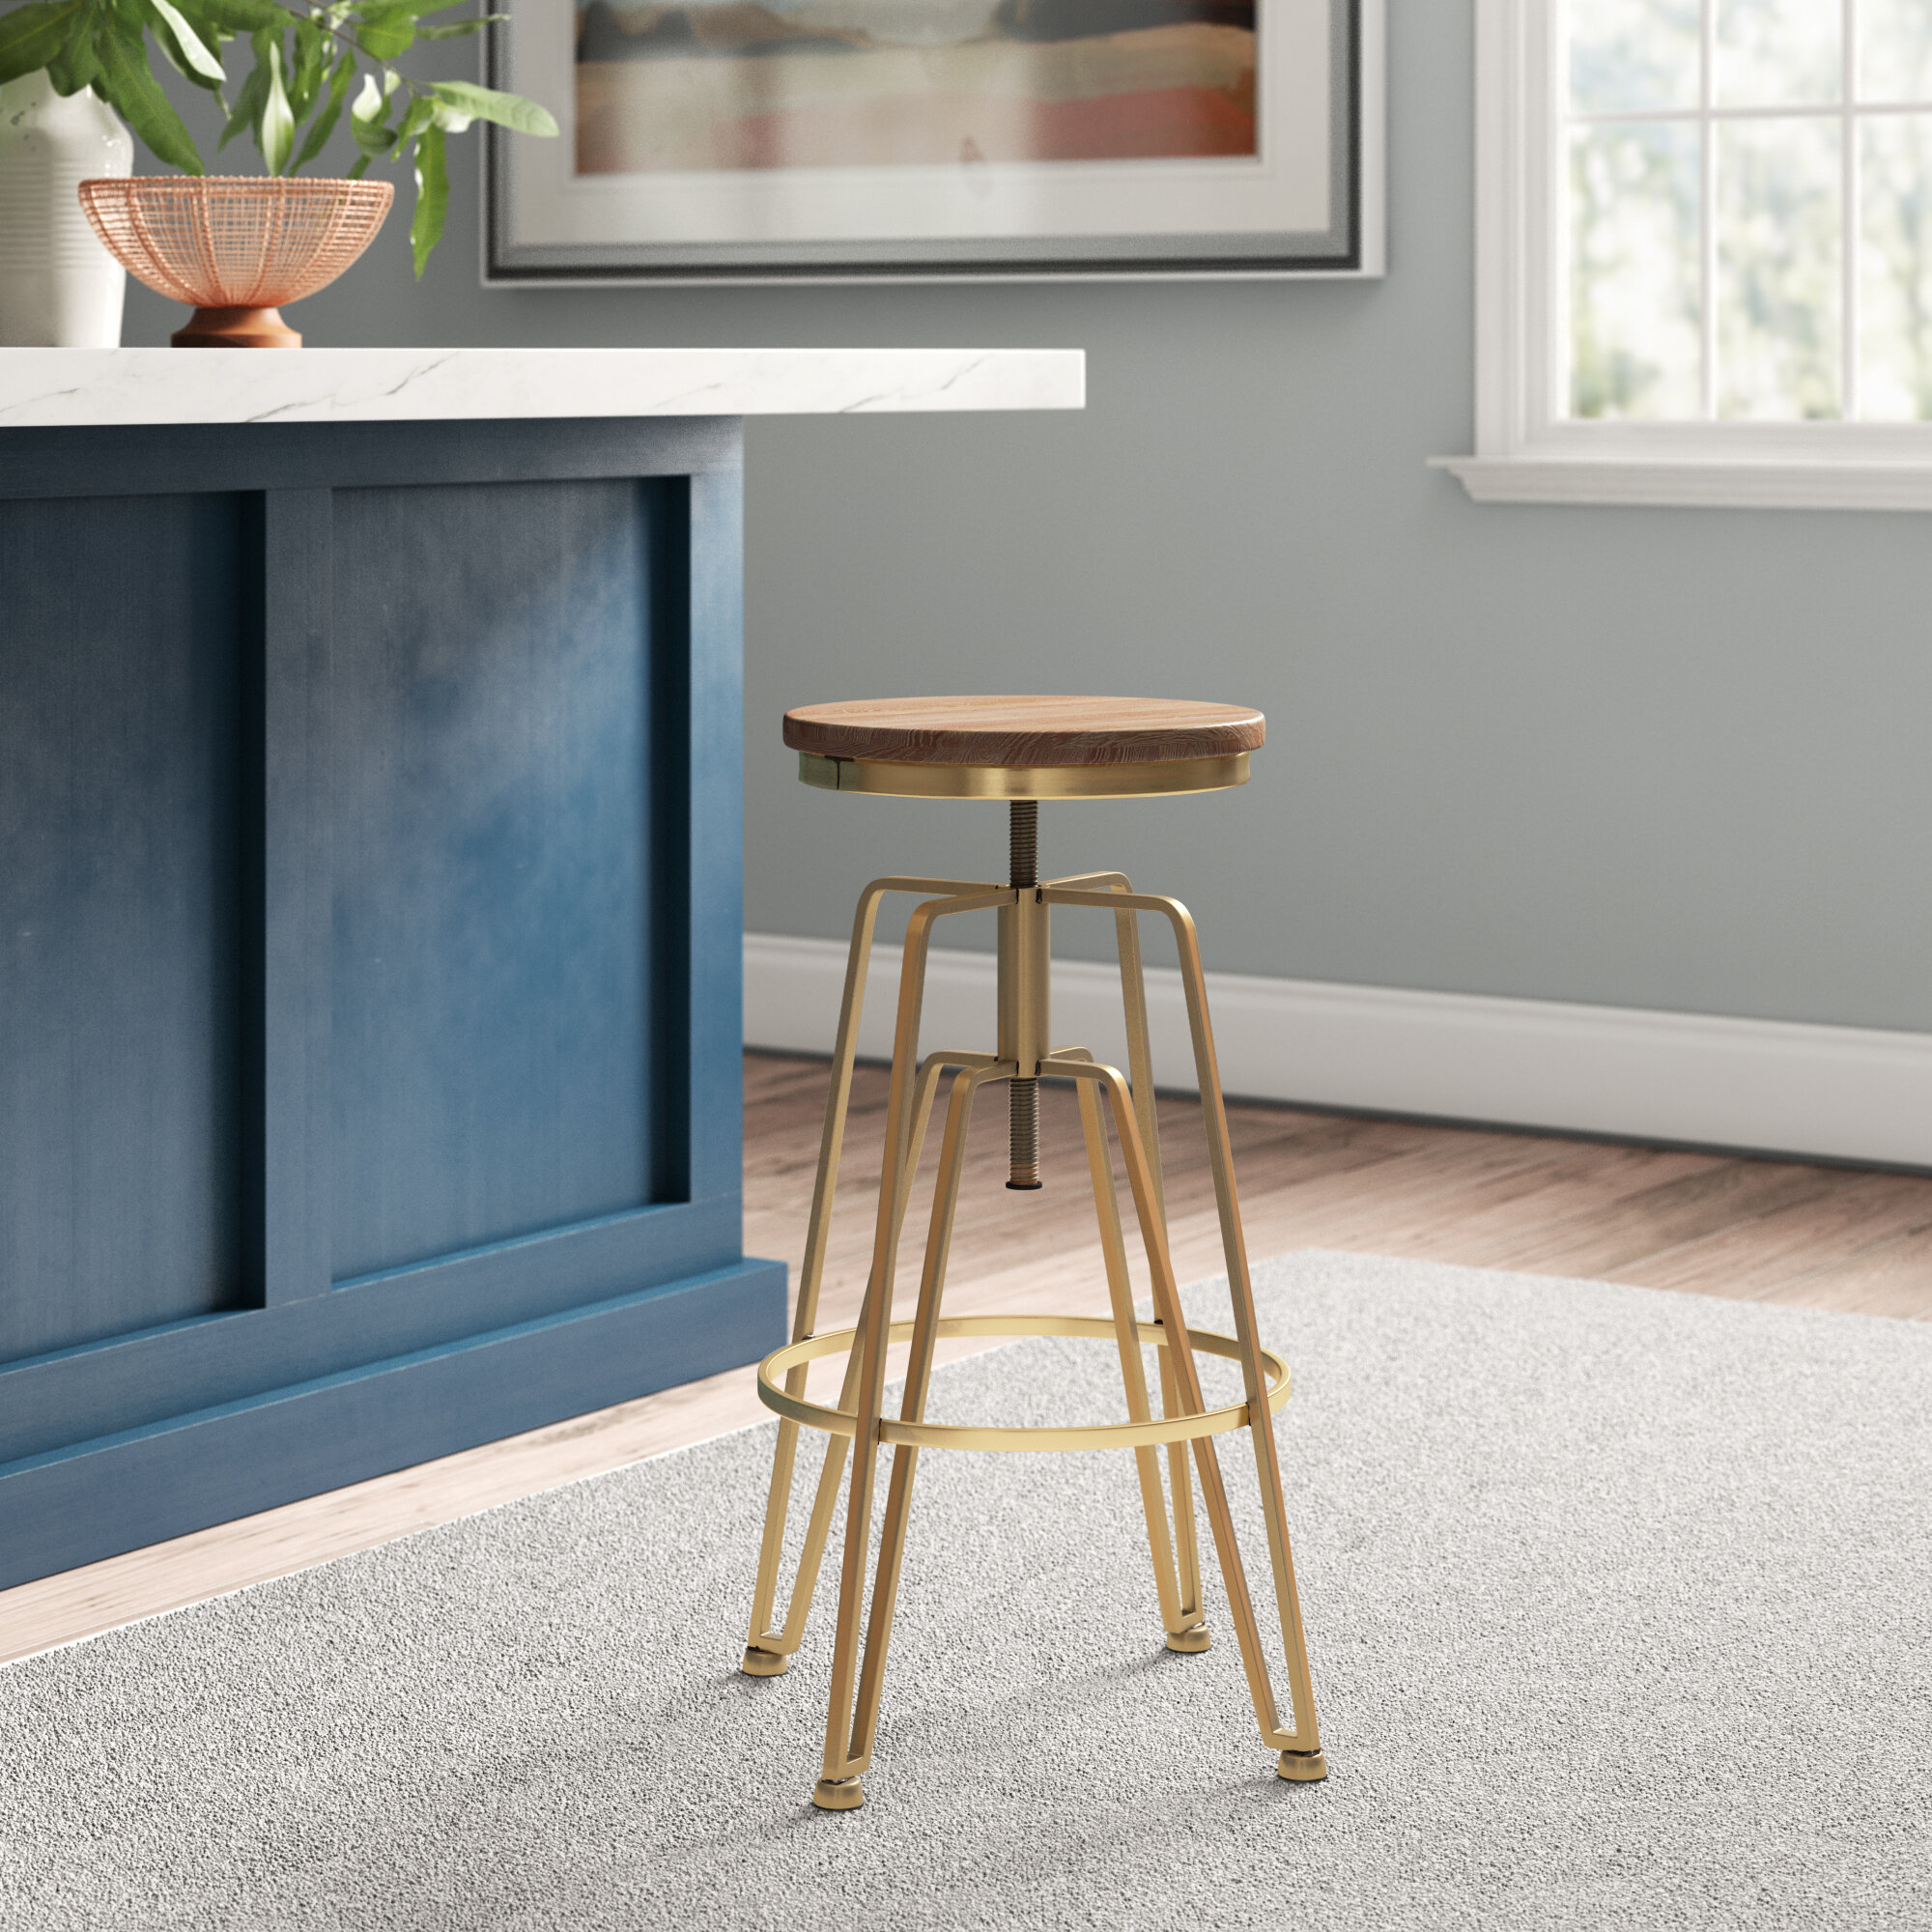 Bed Bath And Beyond Bar Stools Swivel - My Hobby